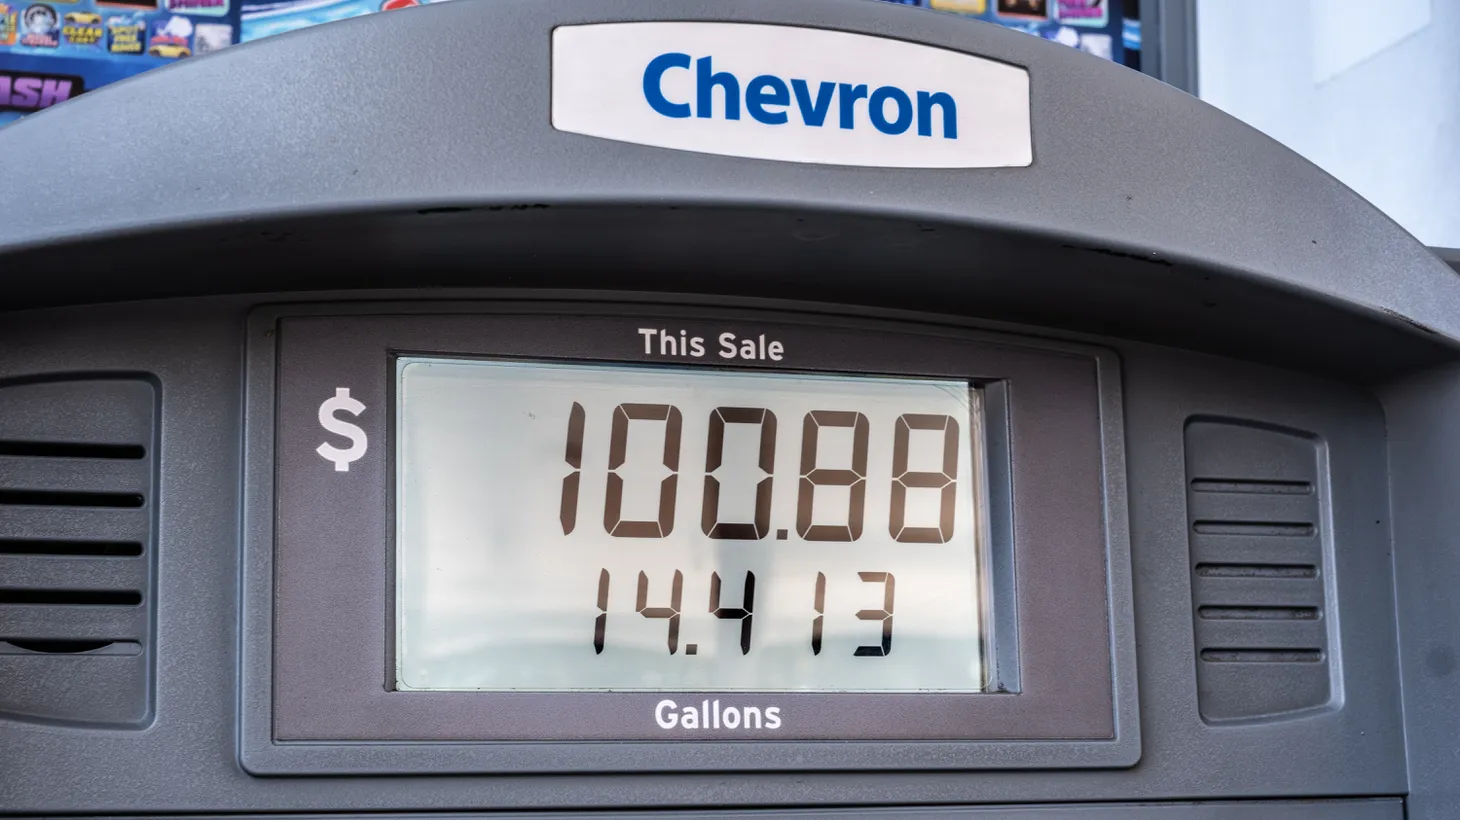 A driver pays $100.00 for a 14-gallon tank of gas at a Chevron station in Culver City, June 28, 2022.